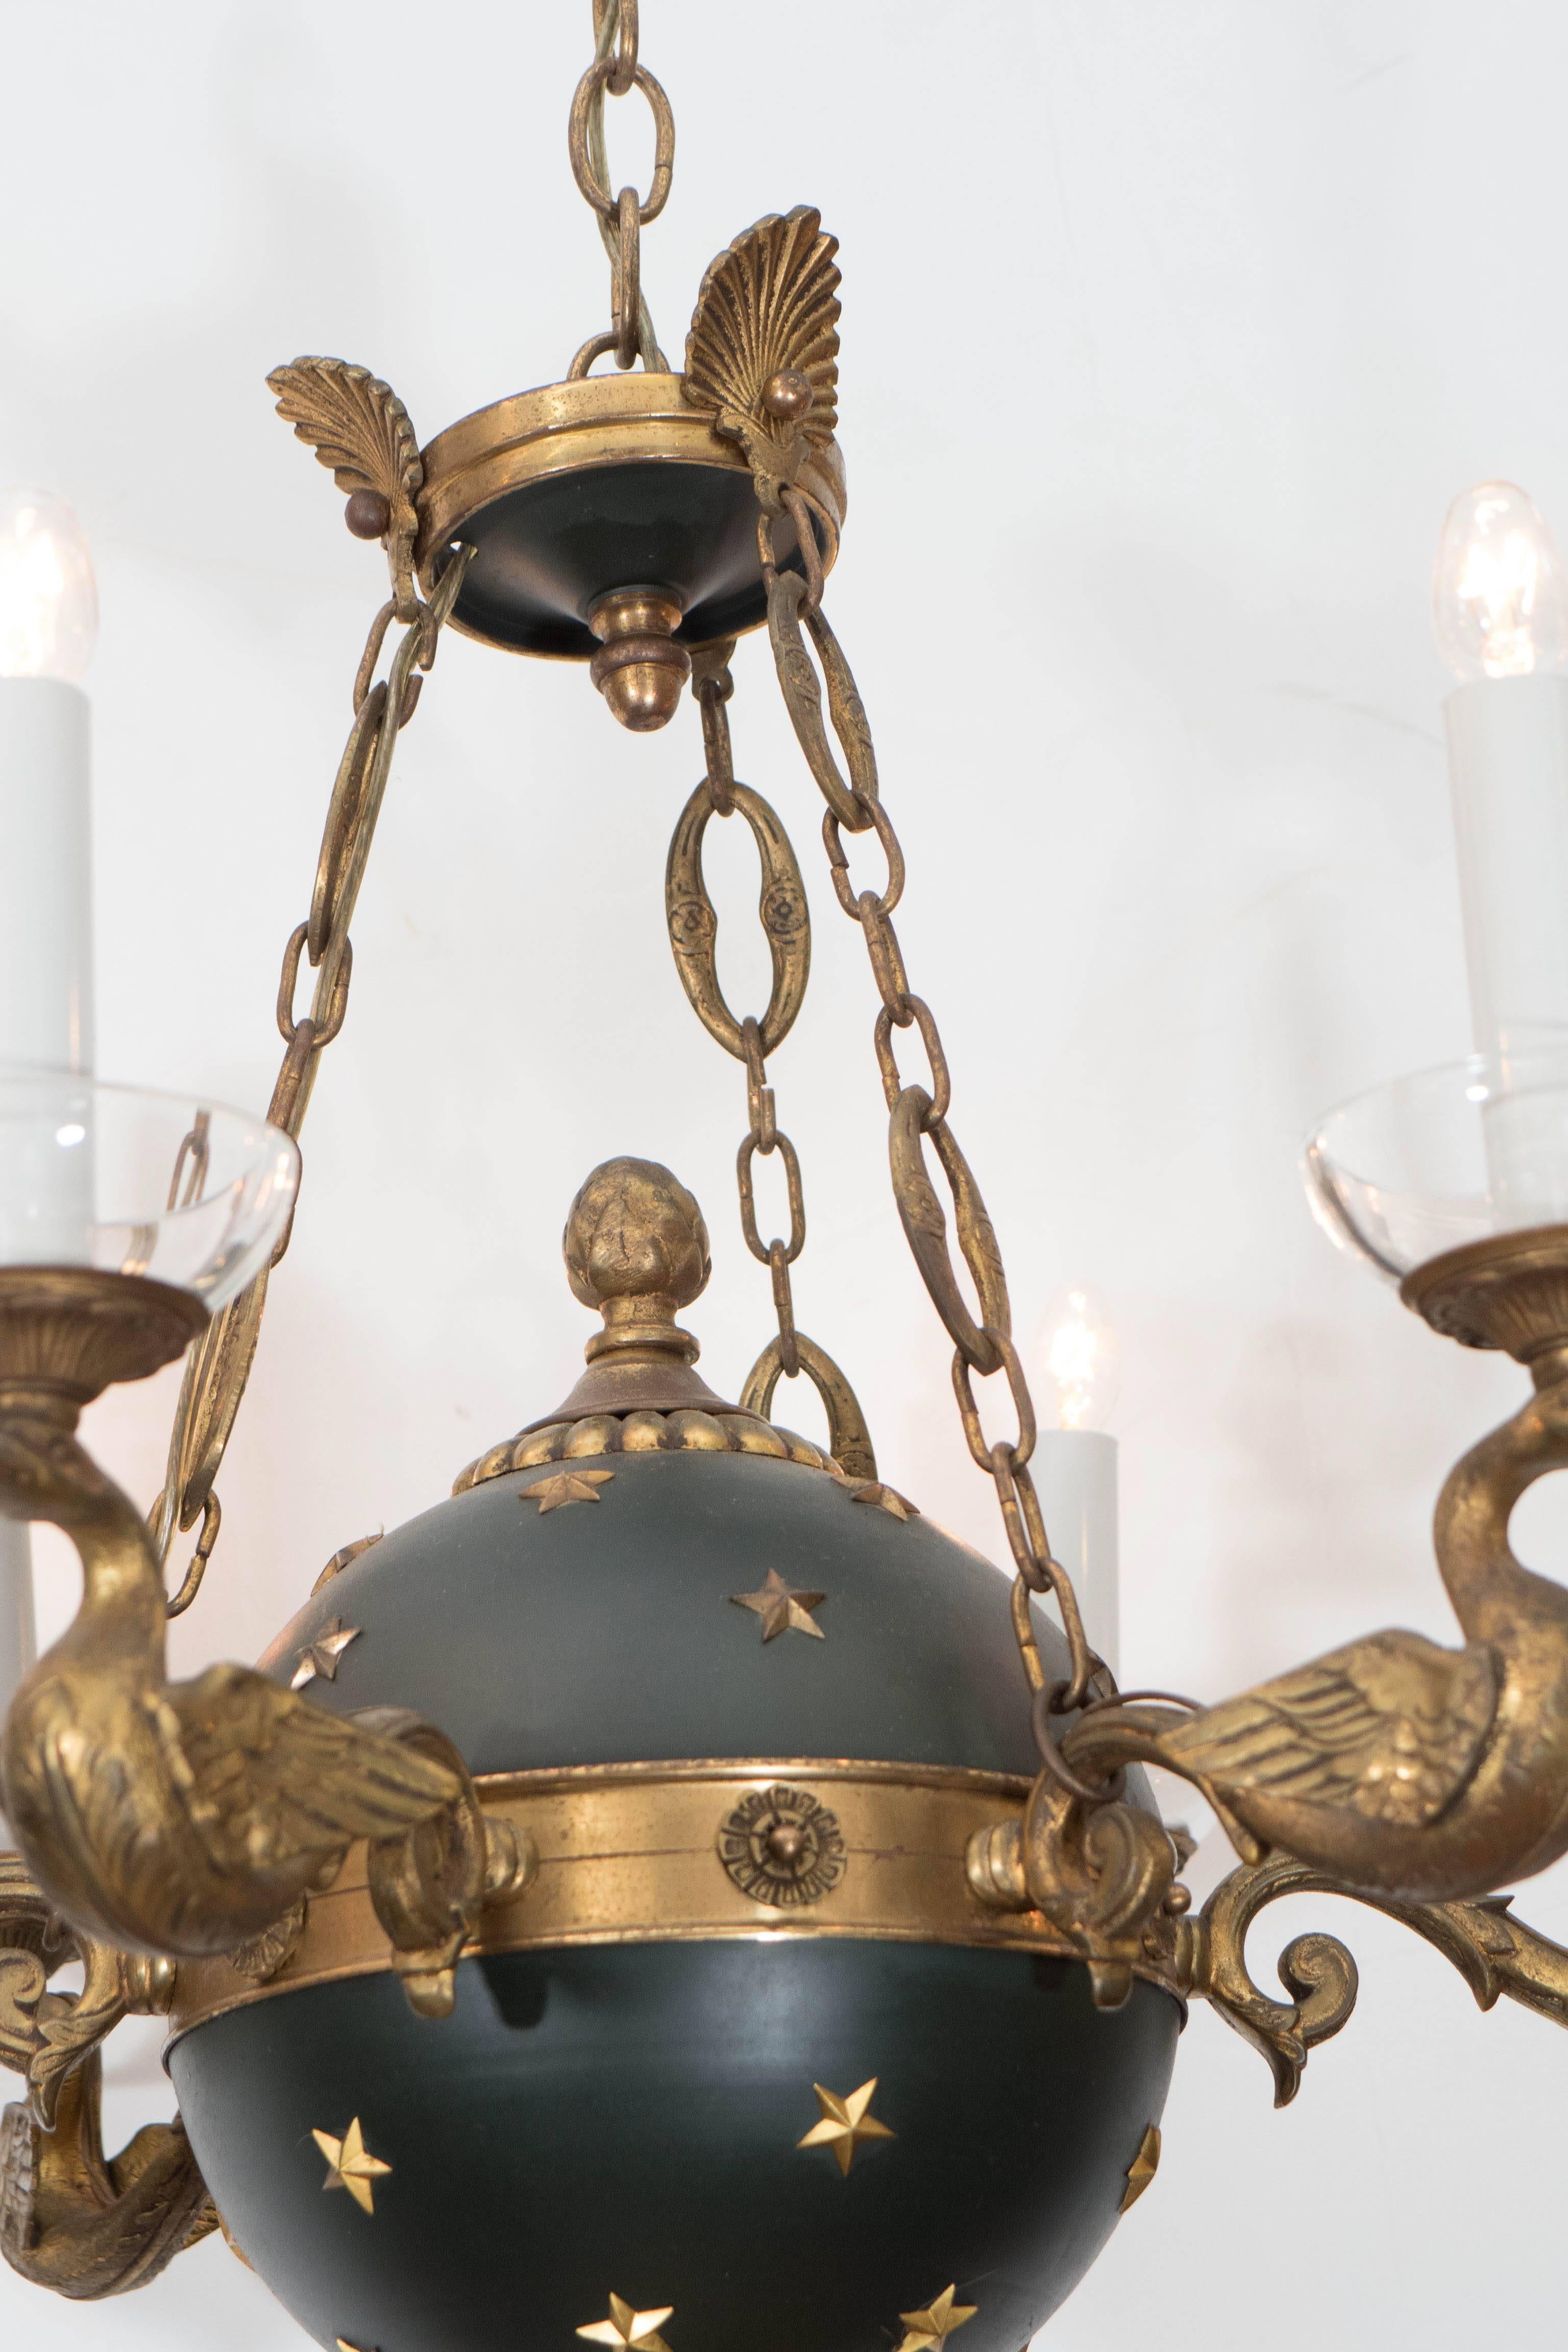 Enameled French Empire Style Chandelier with Celestial Globe and Swan Motif